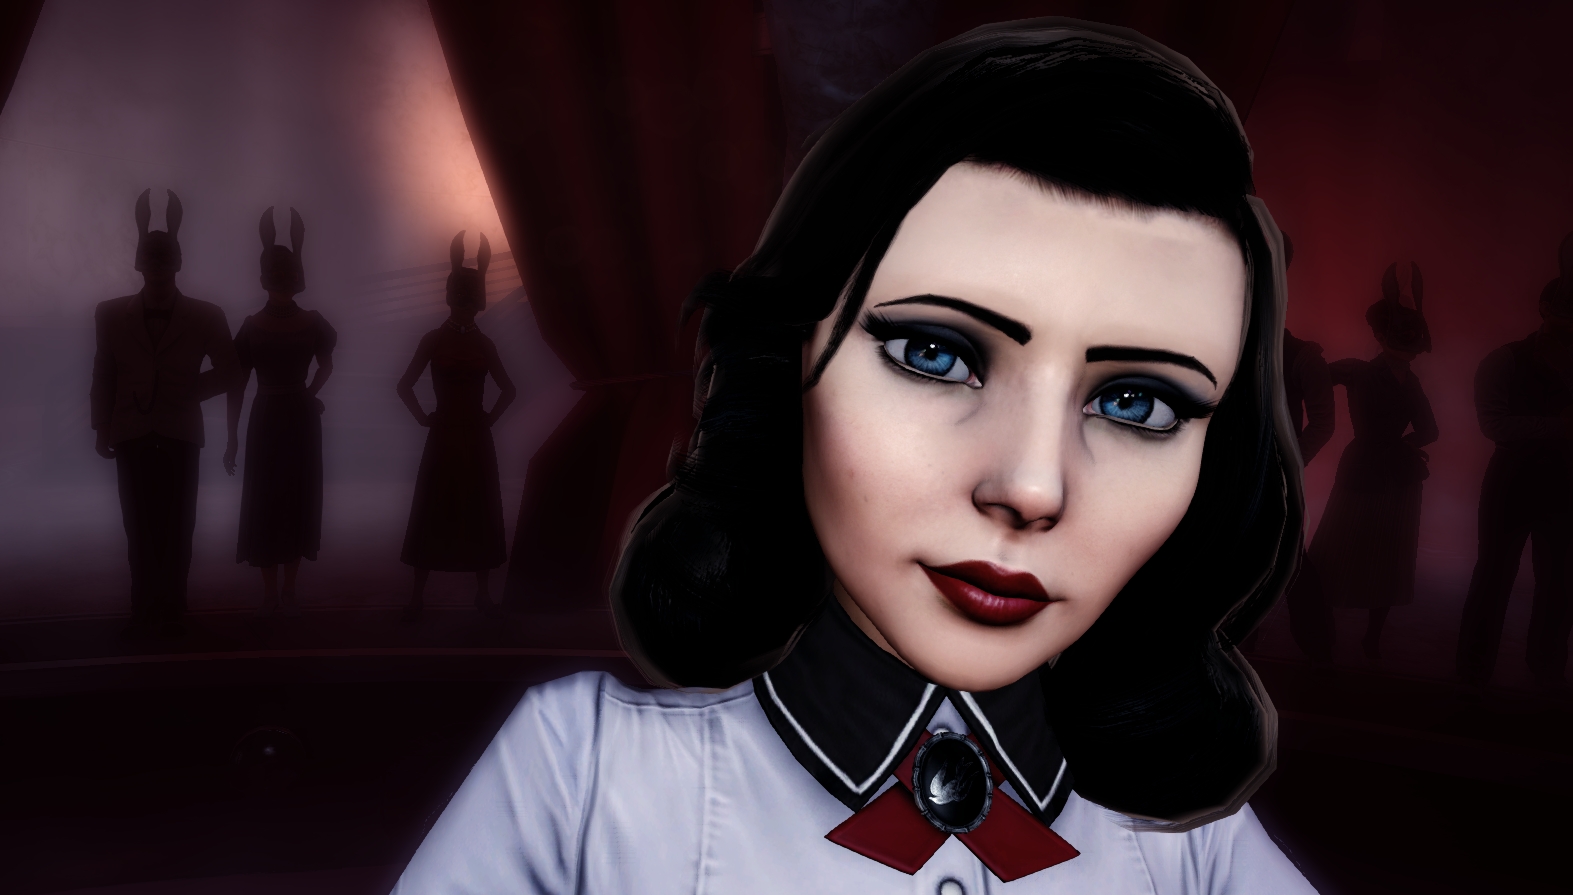 BioShock Infinite: Burial At Sea Backgrounds, Compatible - PC, Mobile, Gadgets| 1573x895 px